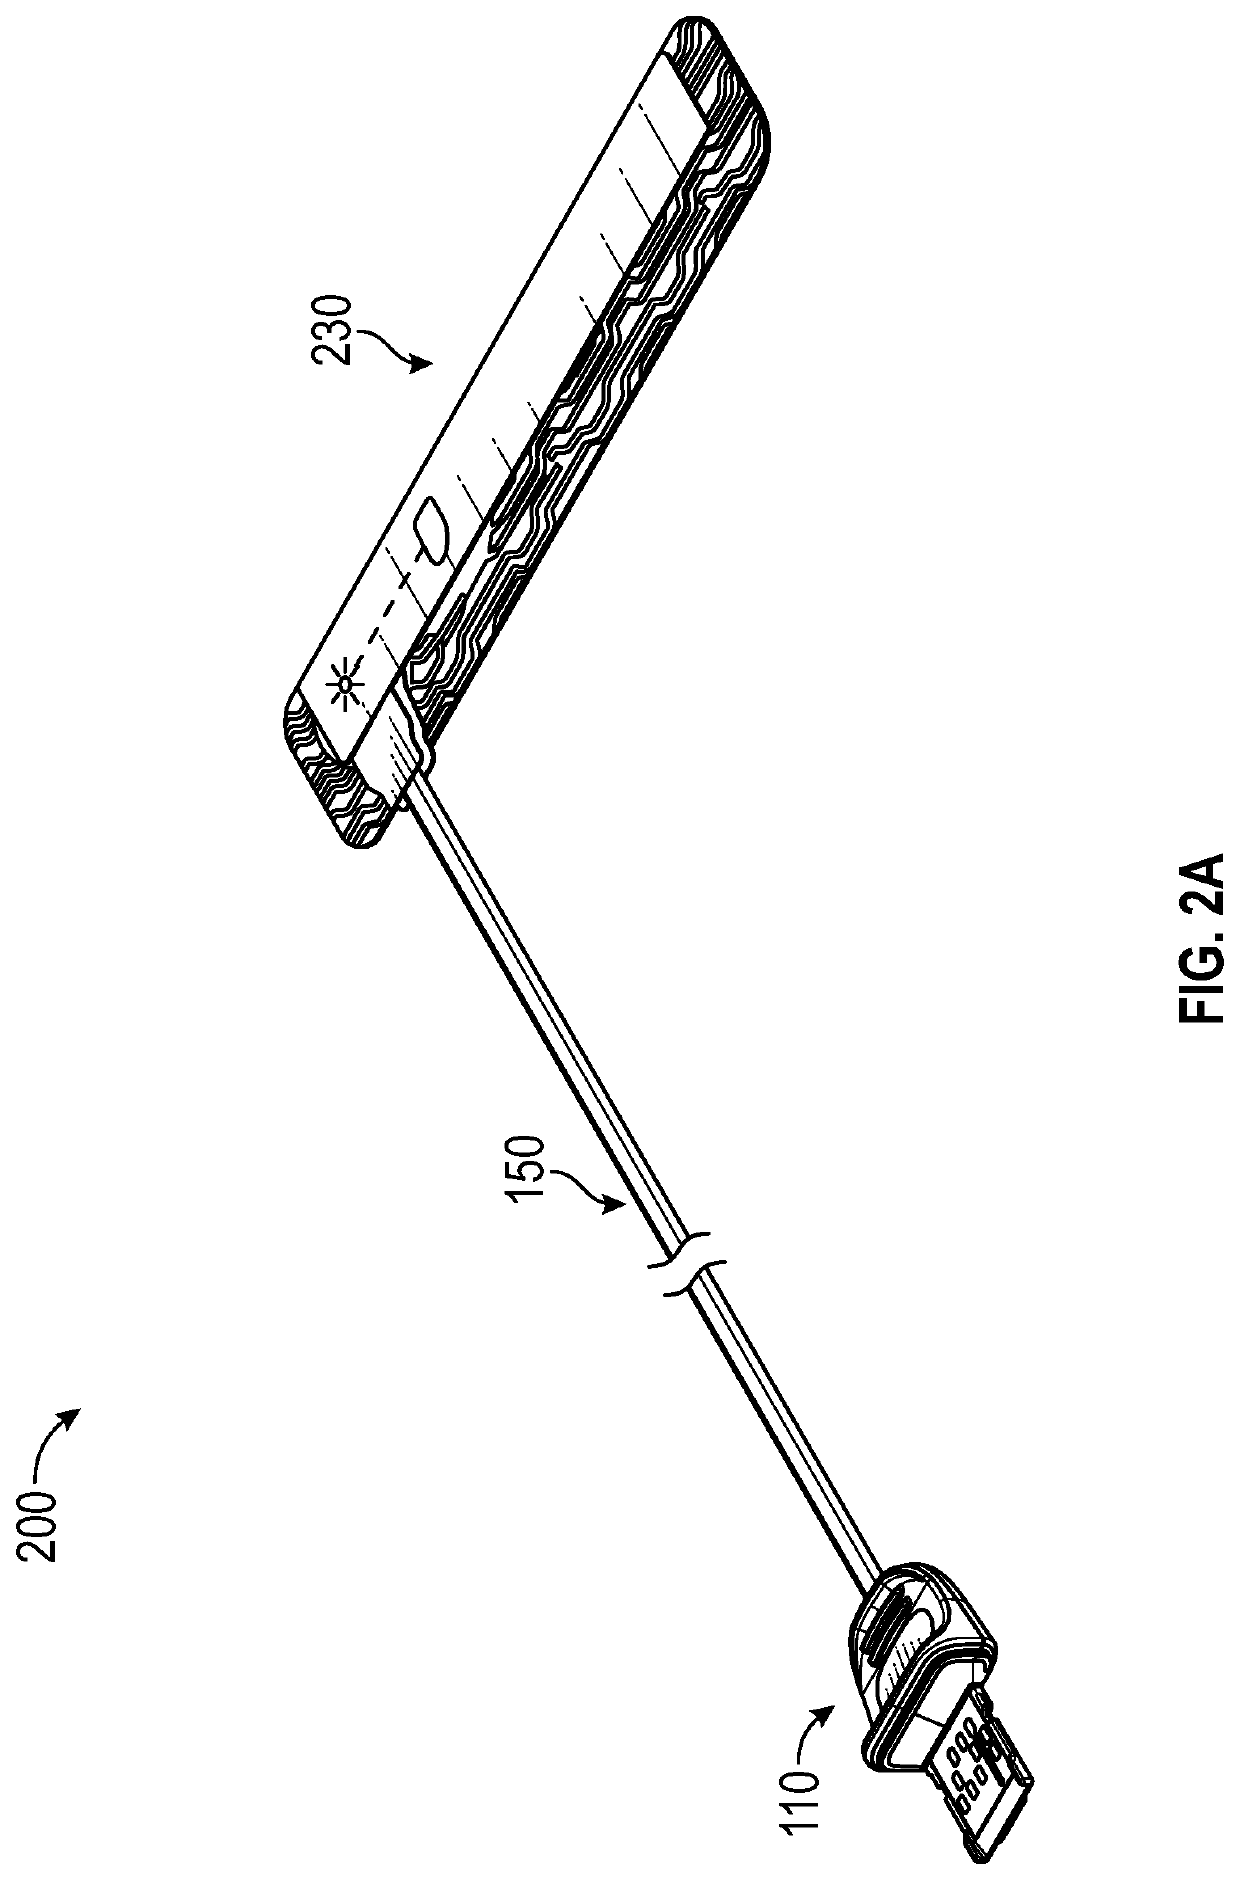 Patient connector assembly with vertical detents